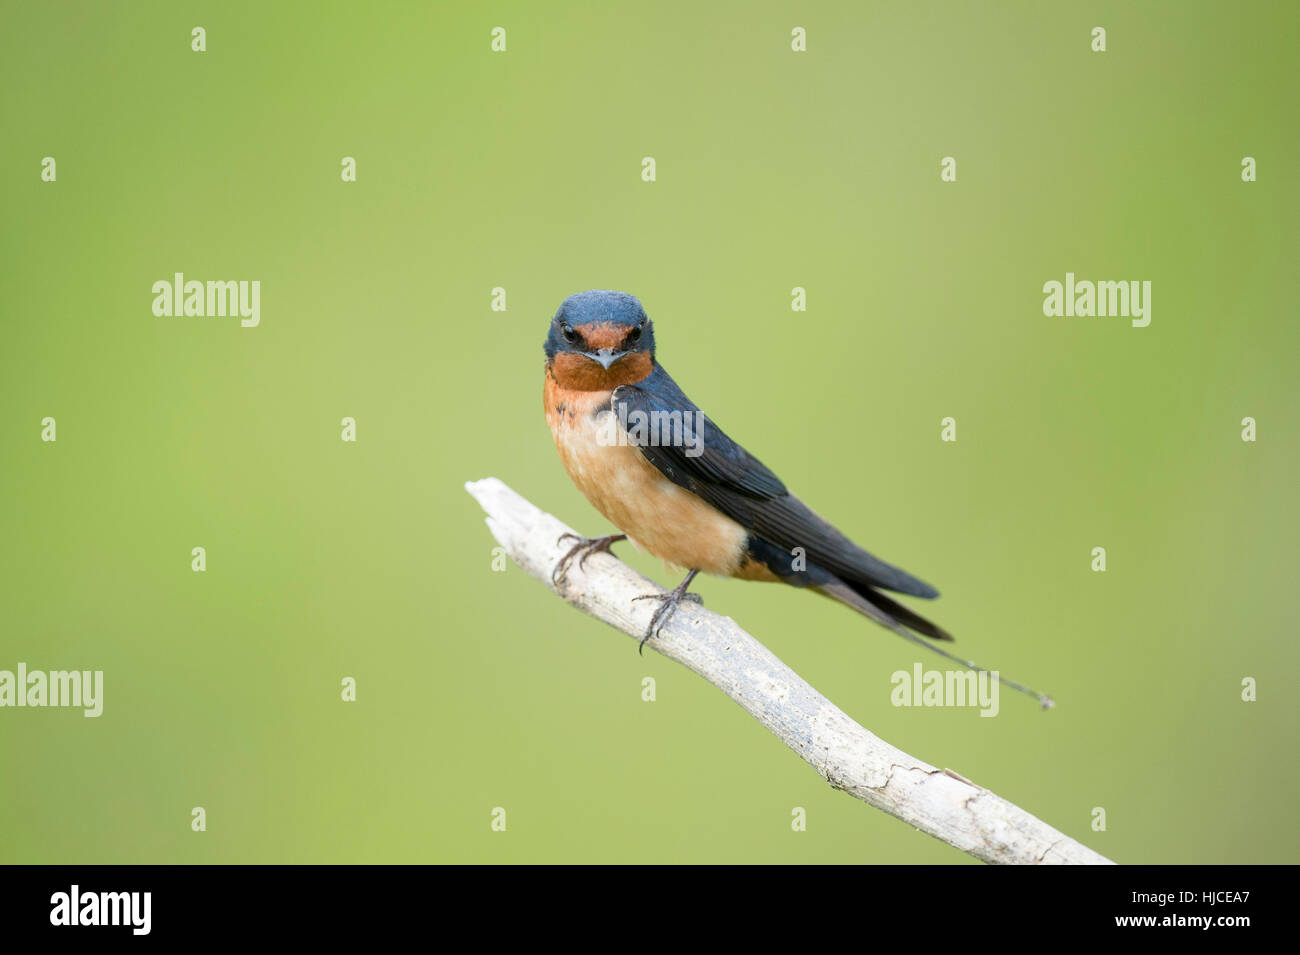 An adult Barn Swallow sits perched on a light branch against a smooth green background. Stock Photo